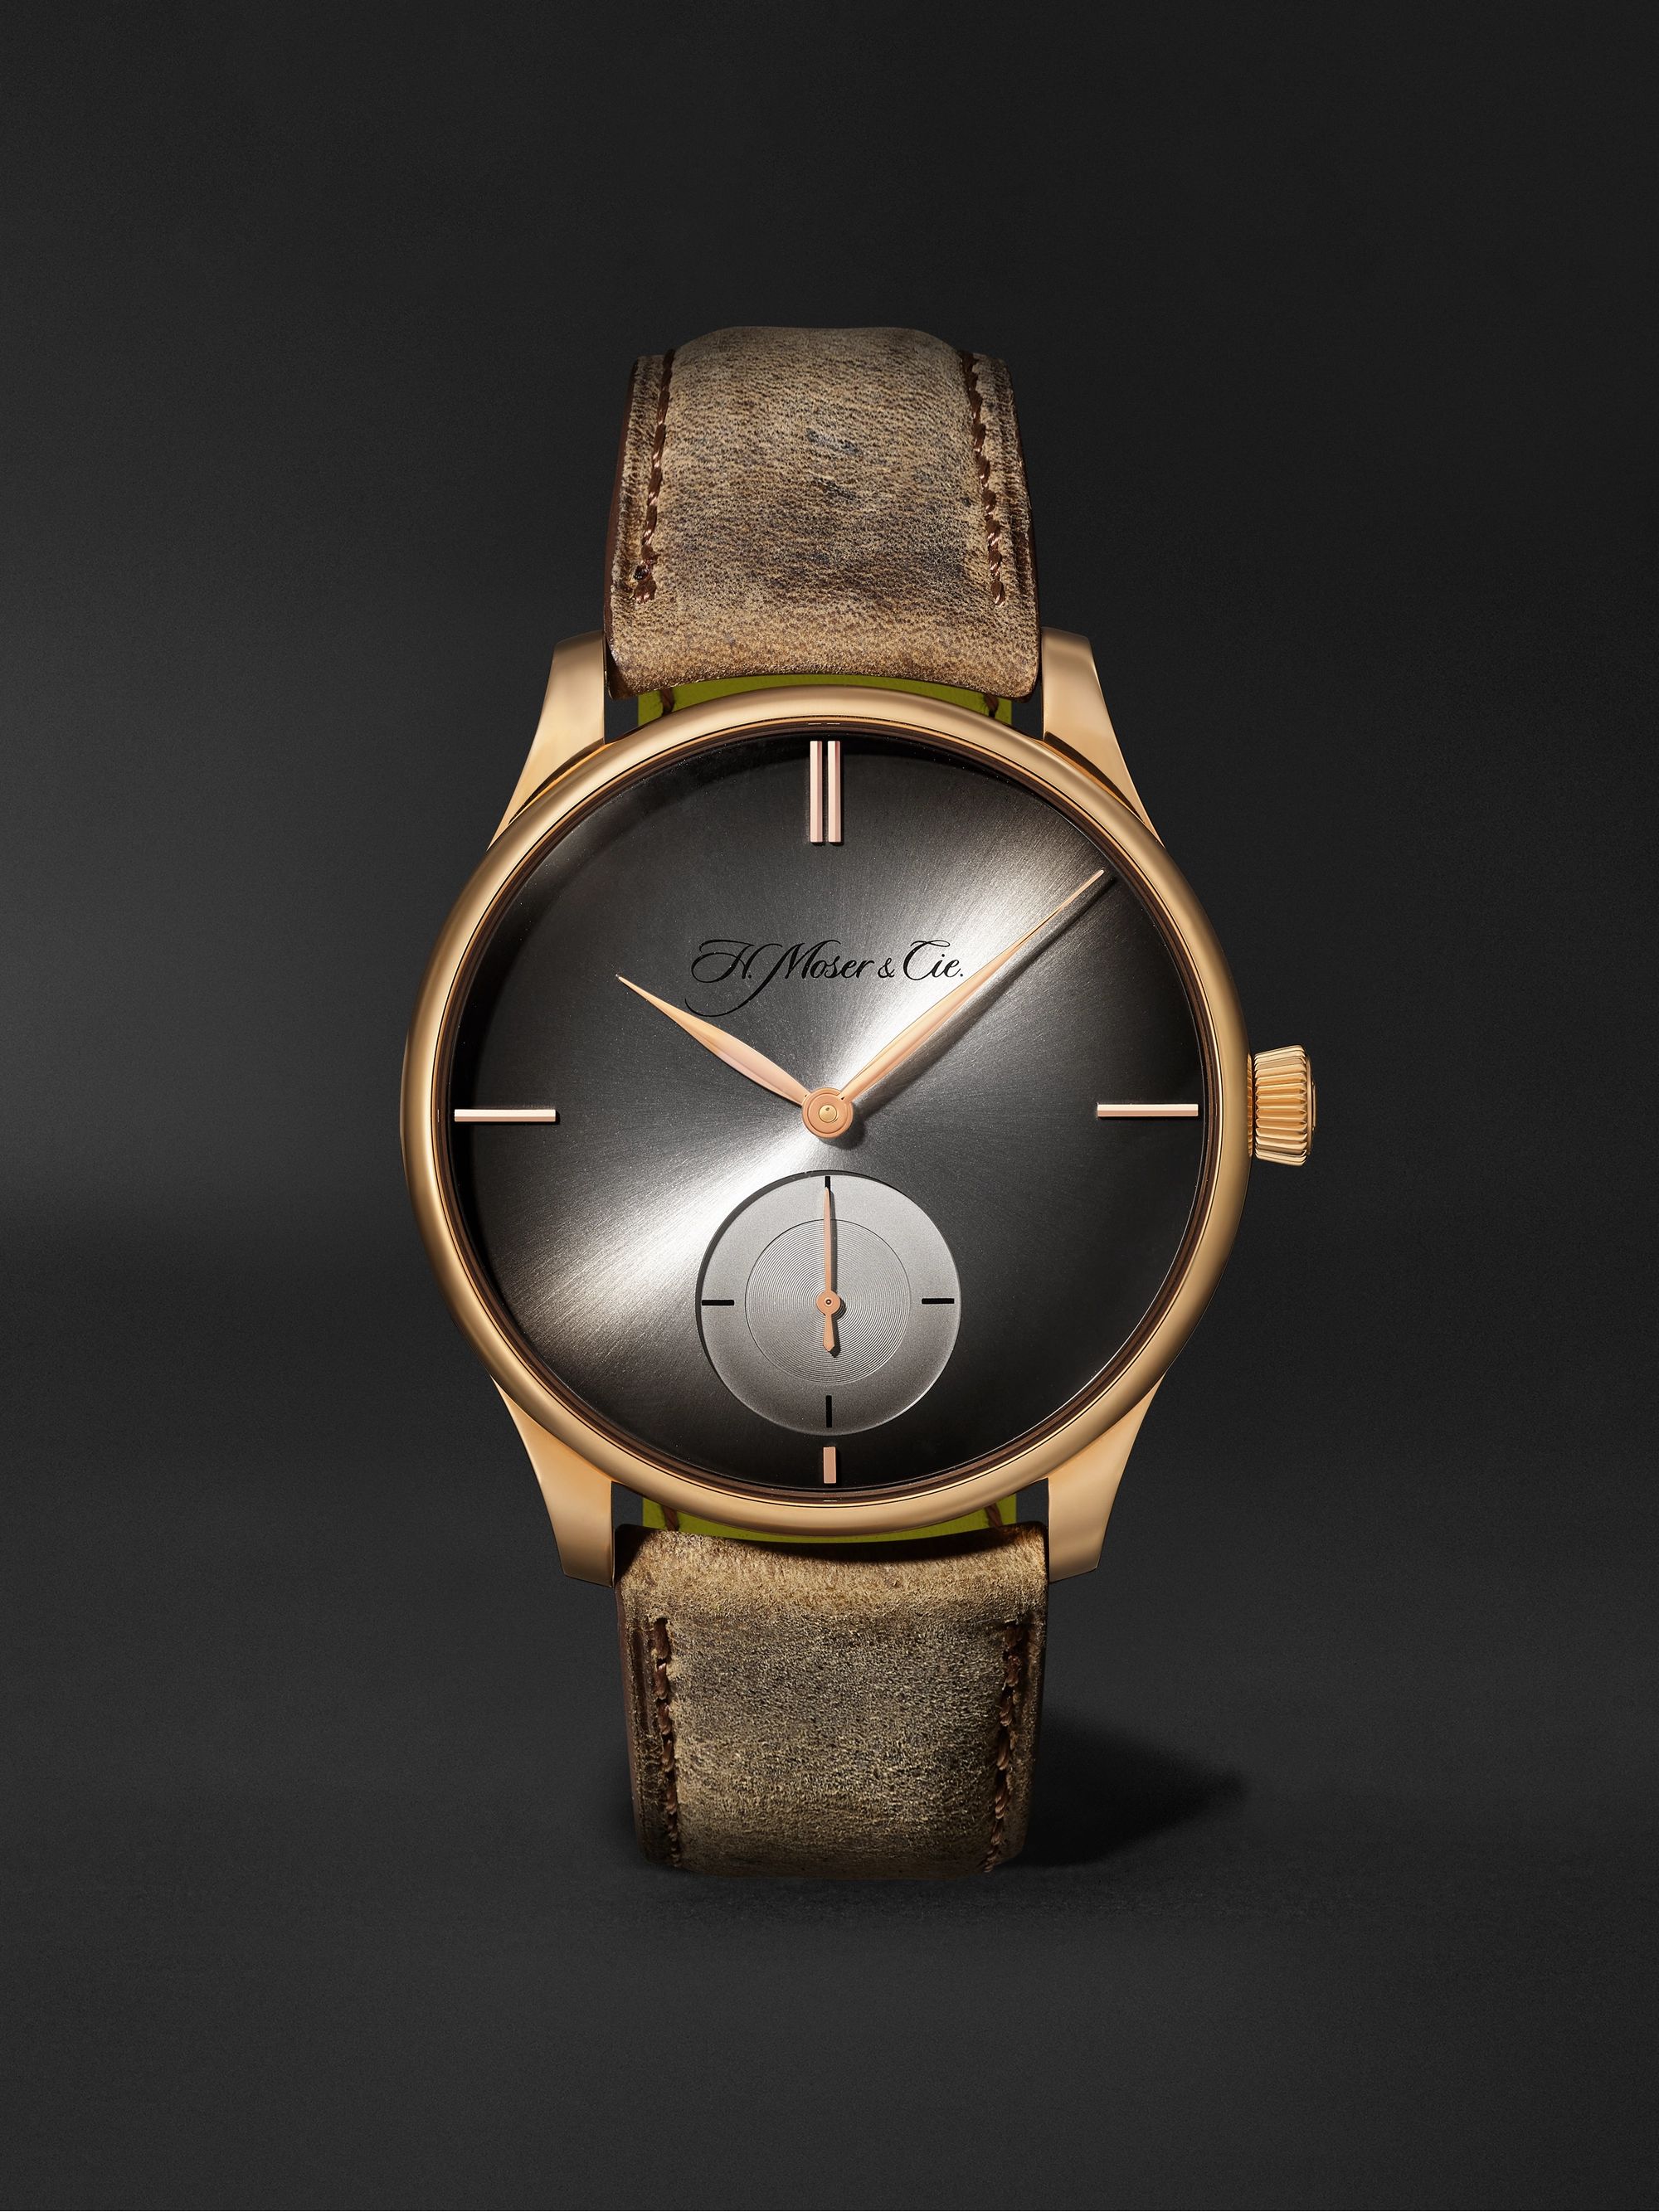 H. MOSER & CIE. Venturer Small Seconds Hand-Wound 43mm 18-Karat Red Gold and Leather Watch, Ref. No. 2327-0408